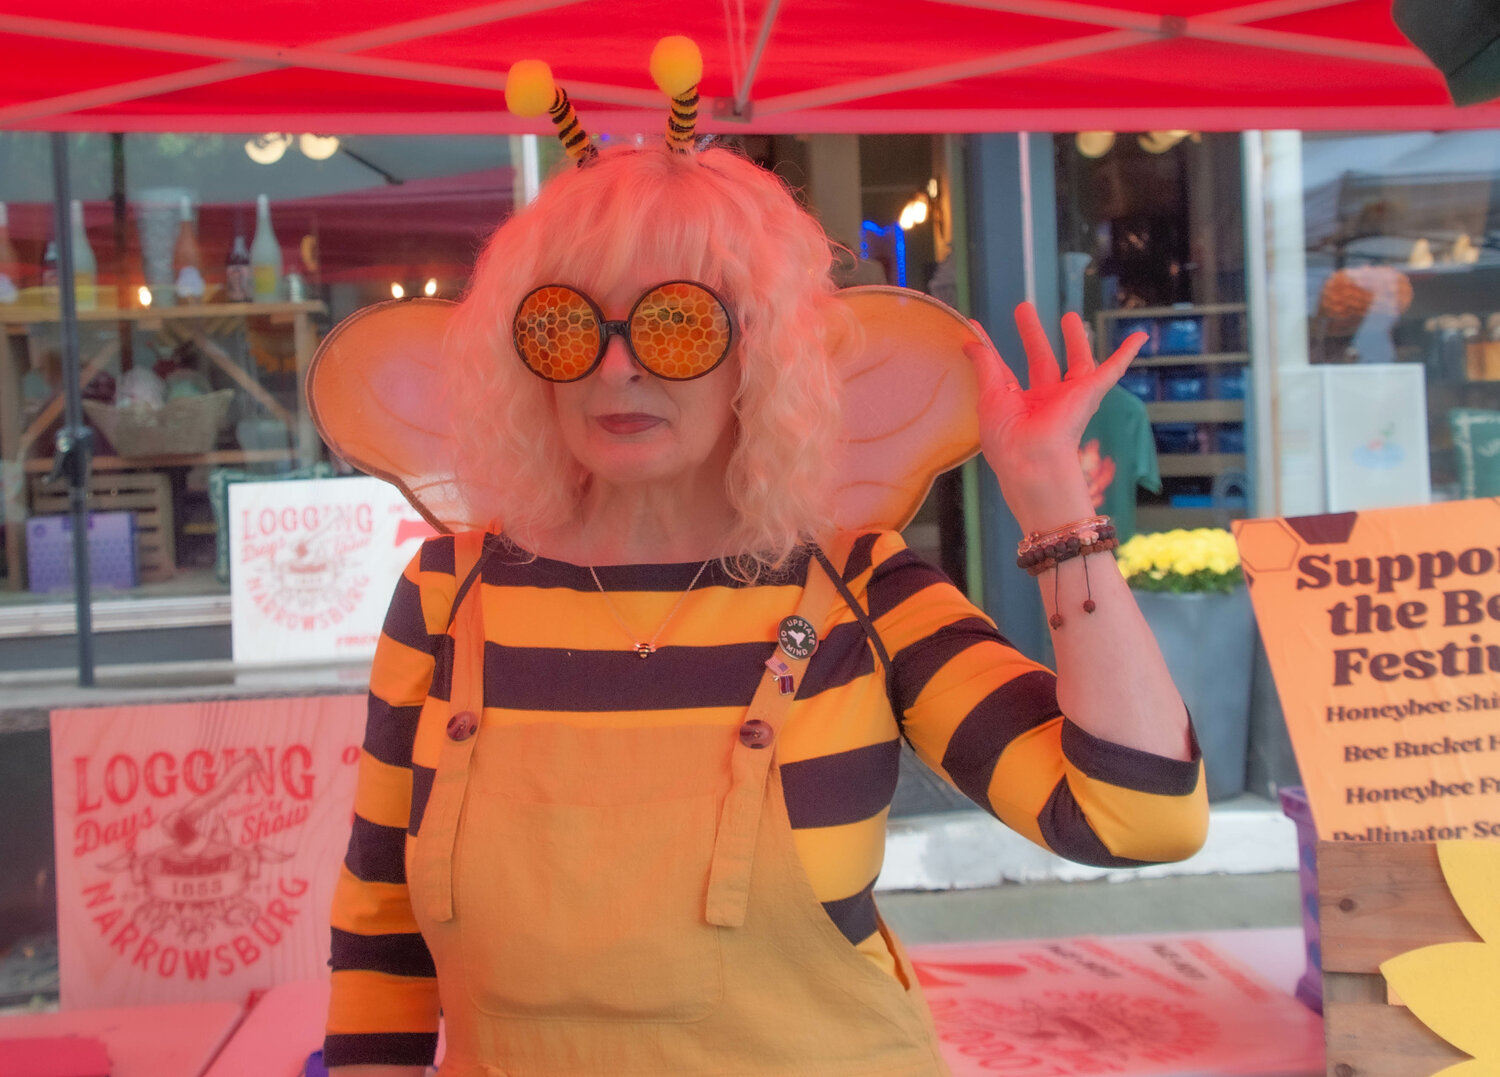 Barbara Kitchen wasn't about to let anything rain on her Honey Bee parade. Clearly.